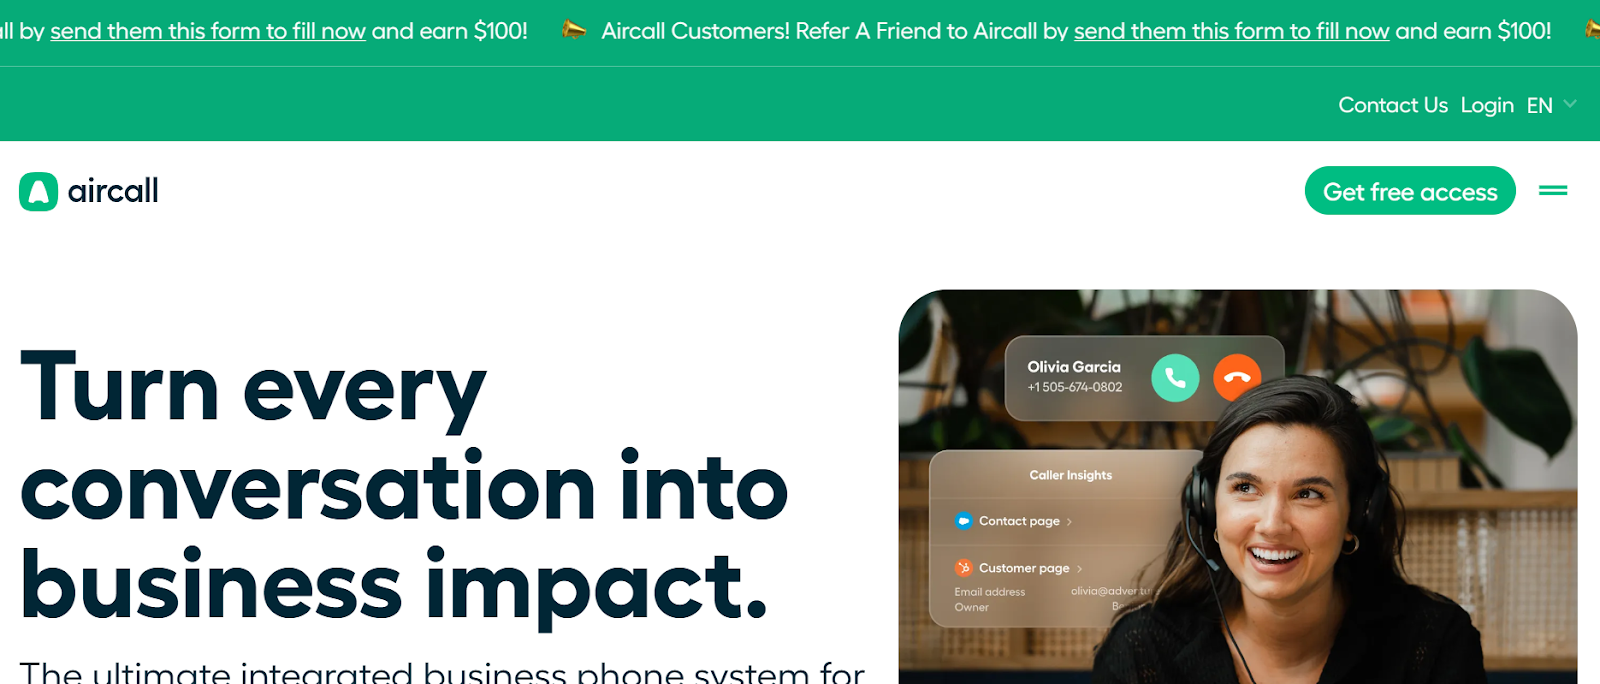 Aircall website snapshot highlighting the services it offers.